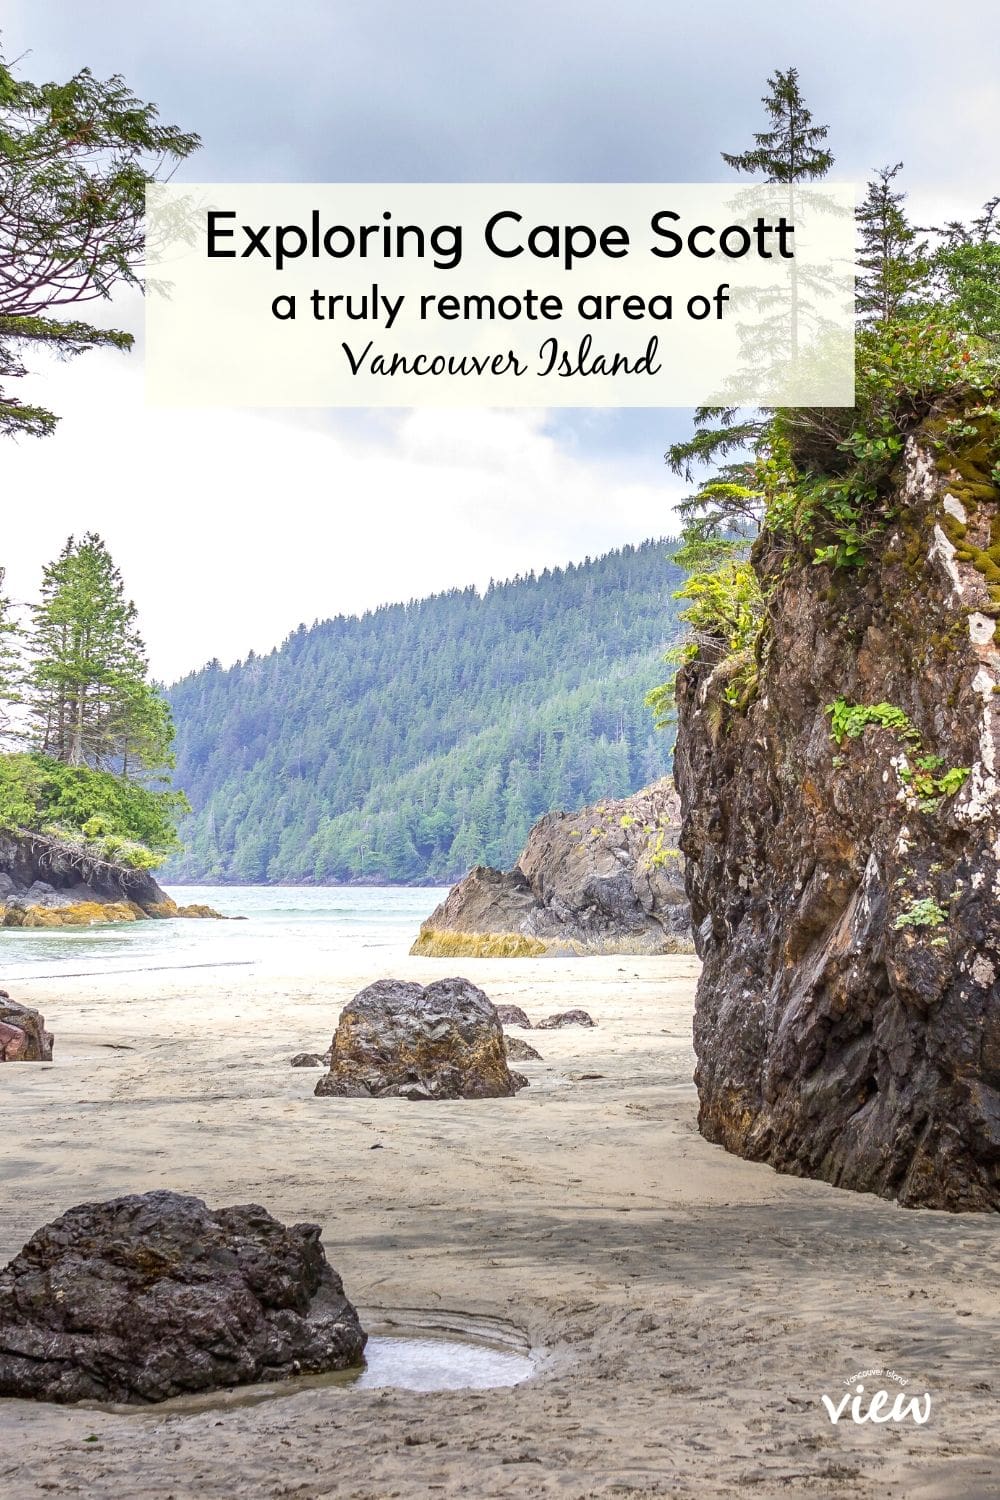 Cape Scott on Vancouver Island's northwestern tip is the best area for white sand beaches and unspoiled nature.